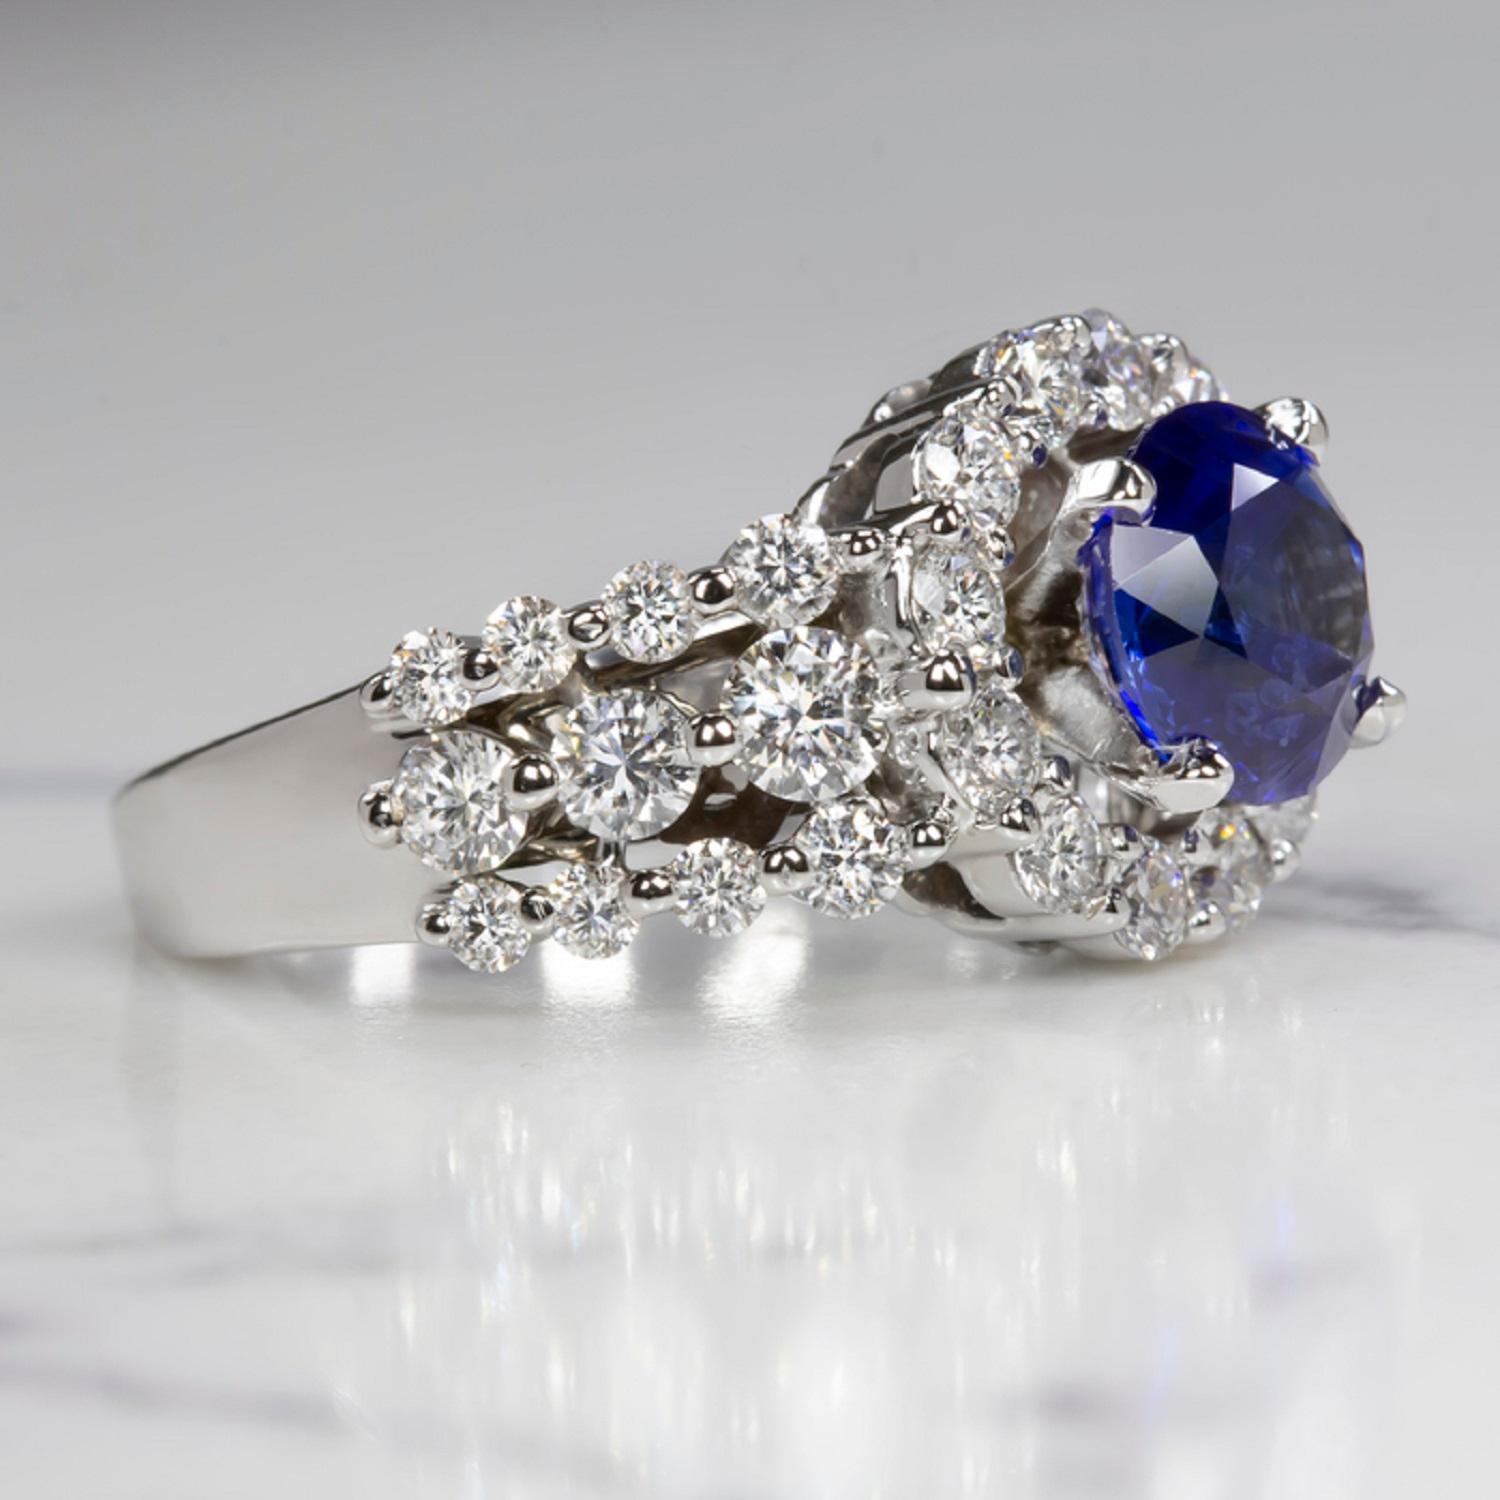 A striking and high quality sapphire and diamond ring has an eye catching, glamorous design featuring a royal blue sapphire surrounded by a halo of vibrant, very high quality diamonds! The large 2.02ct round cut sapphire is a gorgeous royal blue